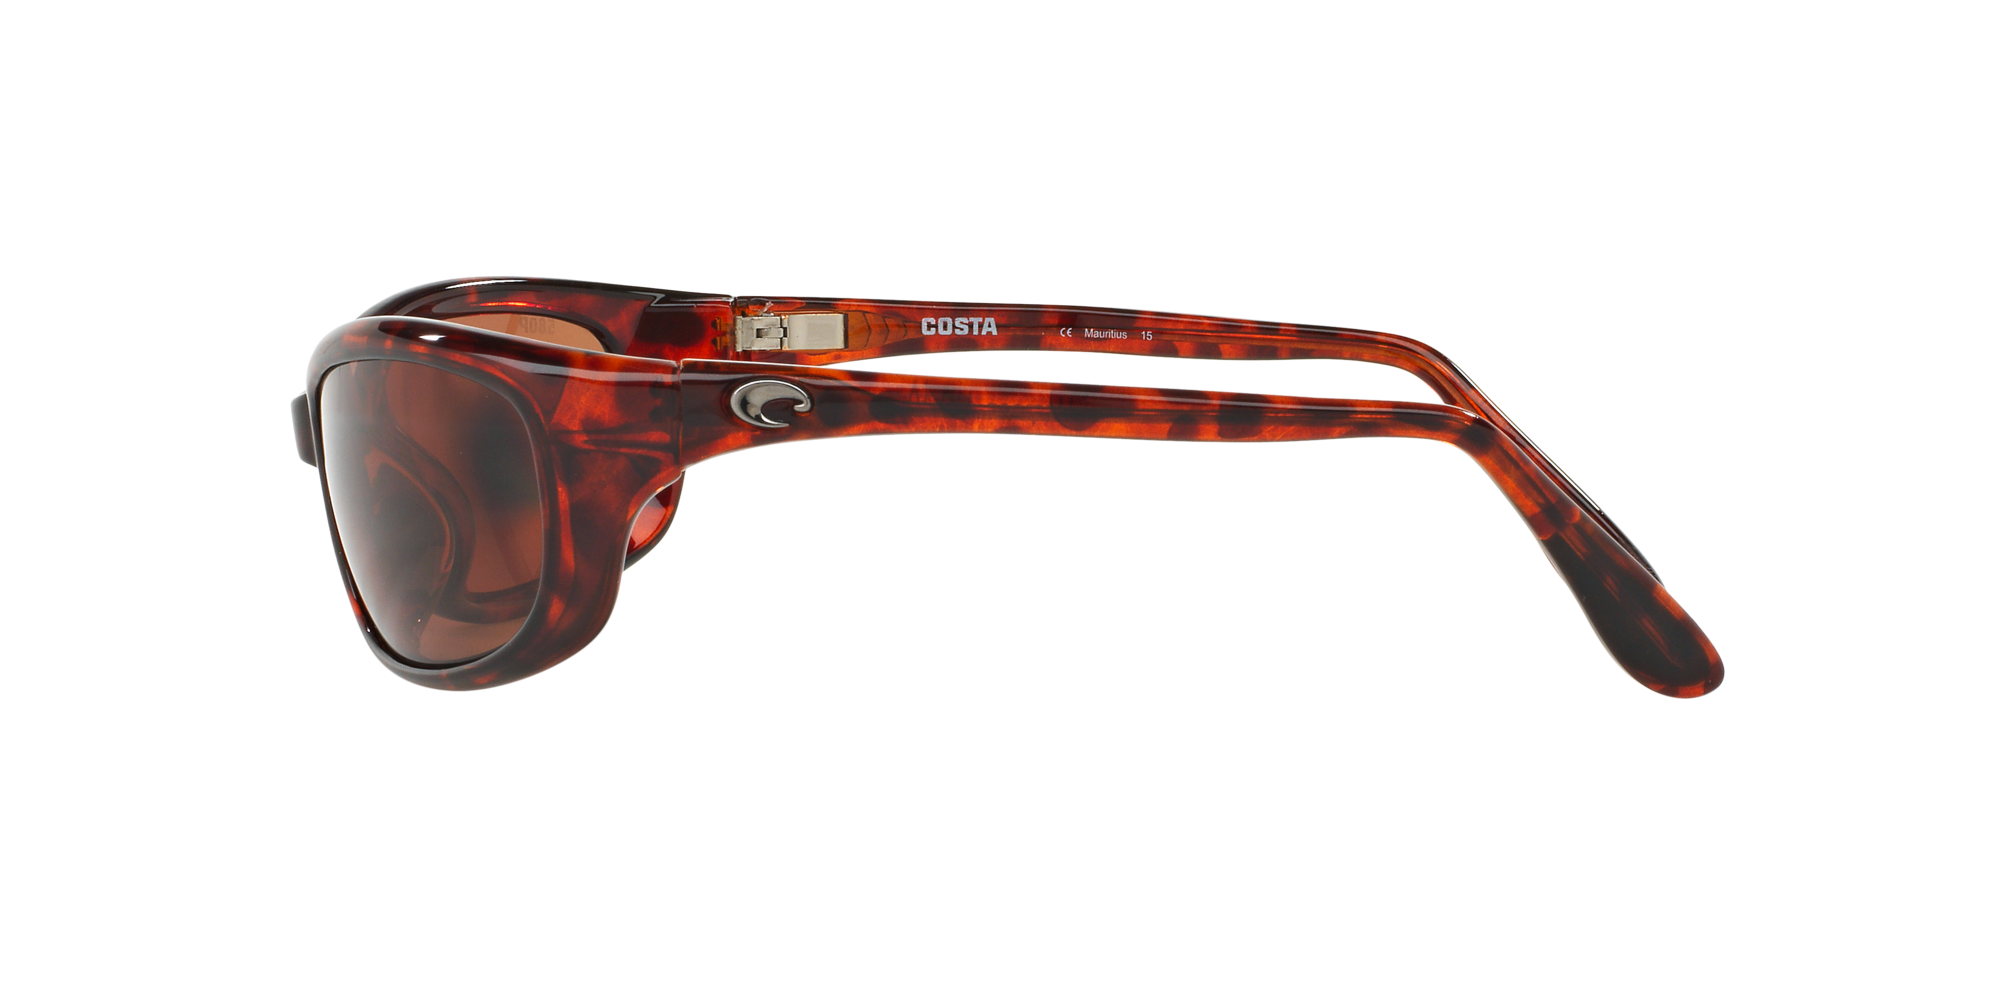 NEW* Costa ROOSTER Tortoise POLARIZED 580P COPPER Poly lens Sunglass RO 10